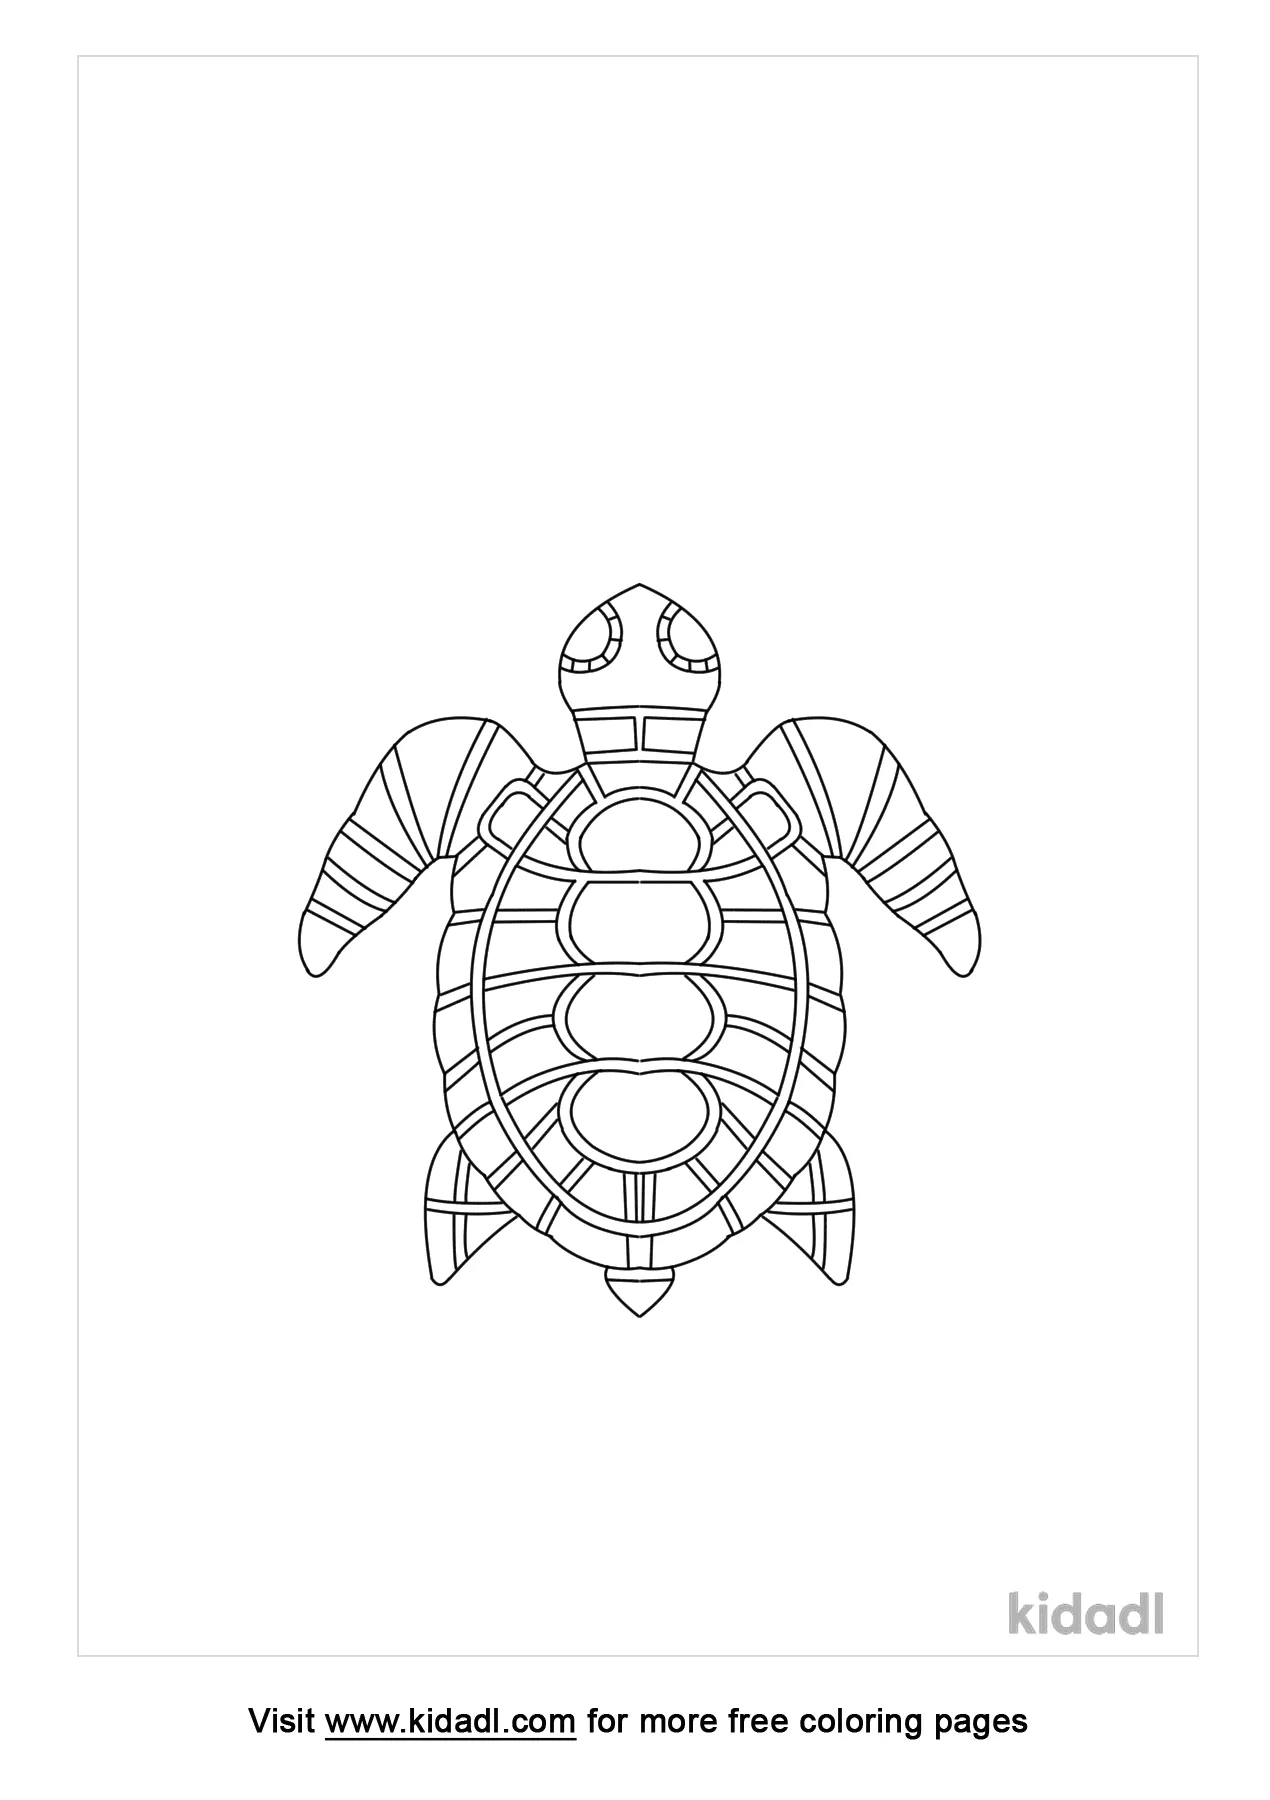 Mosaic Animals Coloring Page   Free Realistic Coloring Page   Kidadl